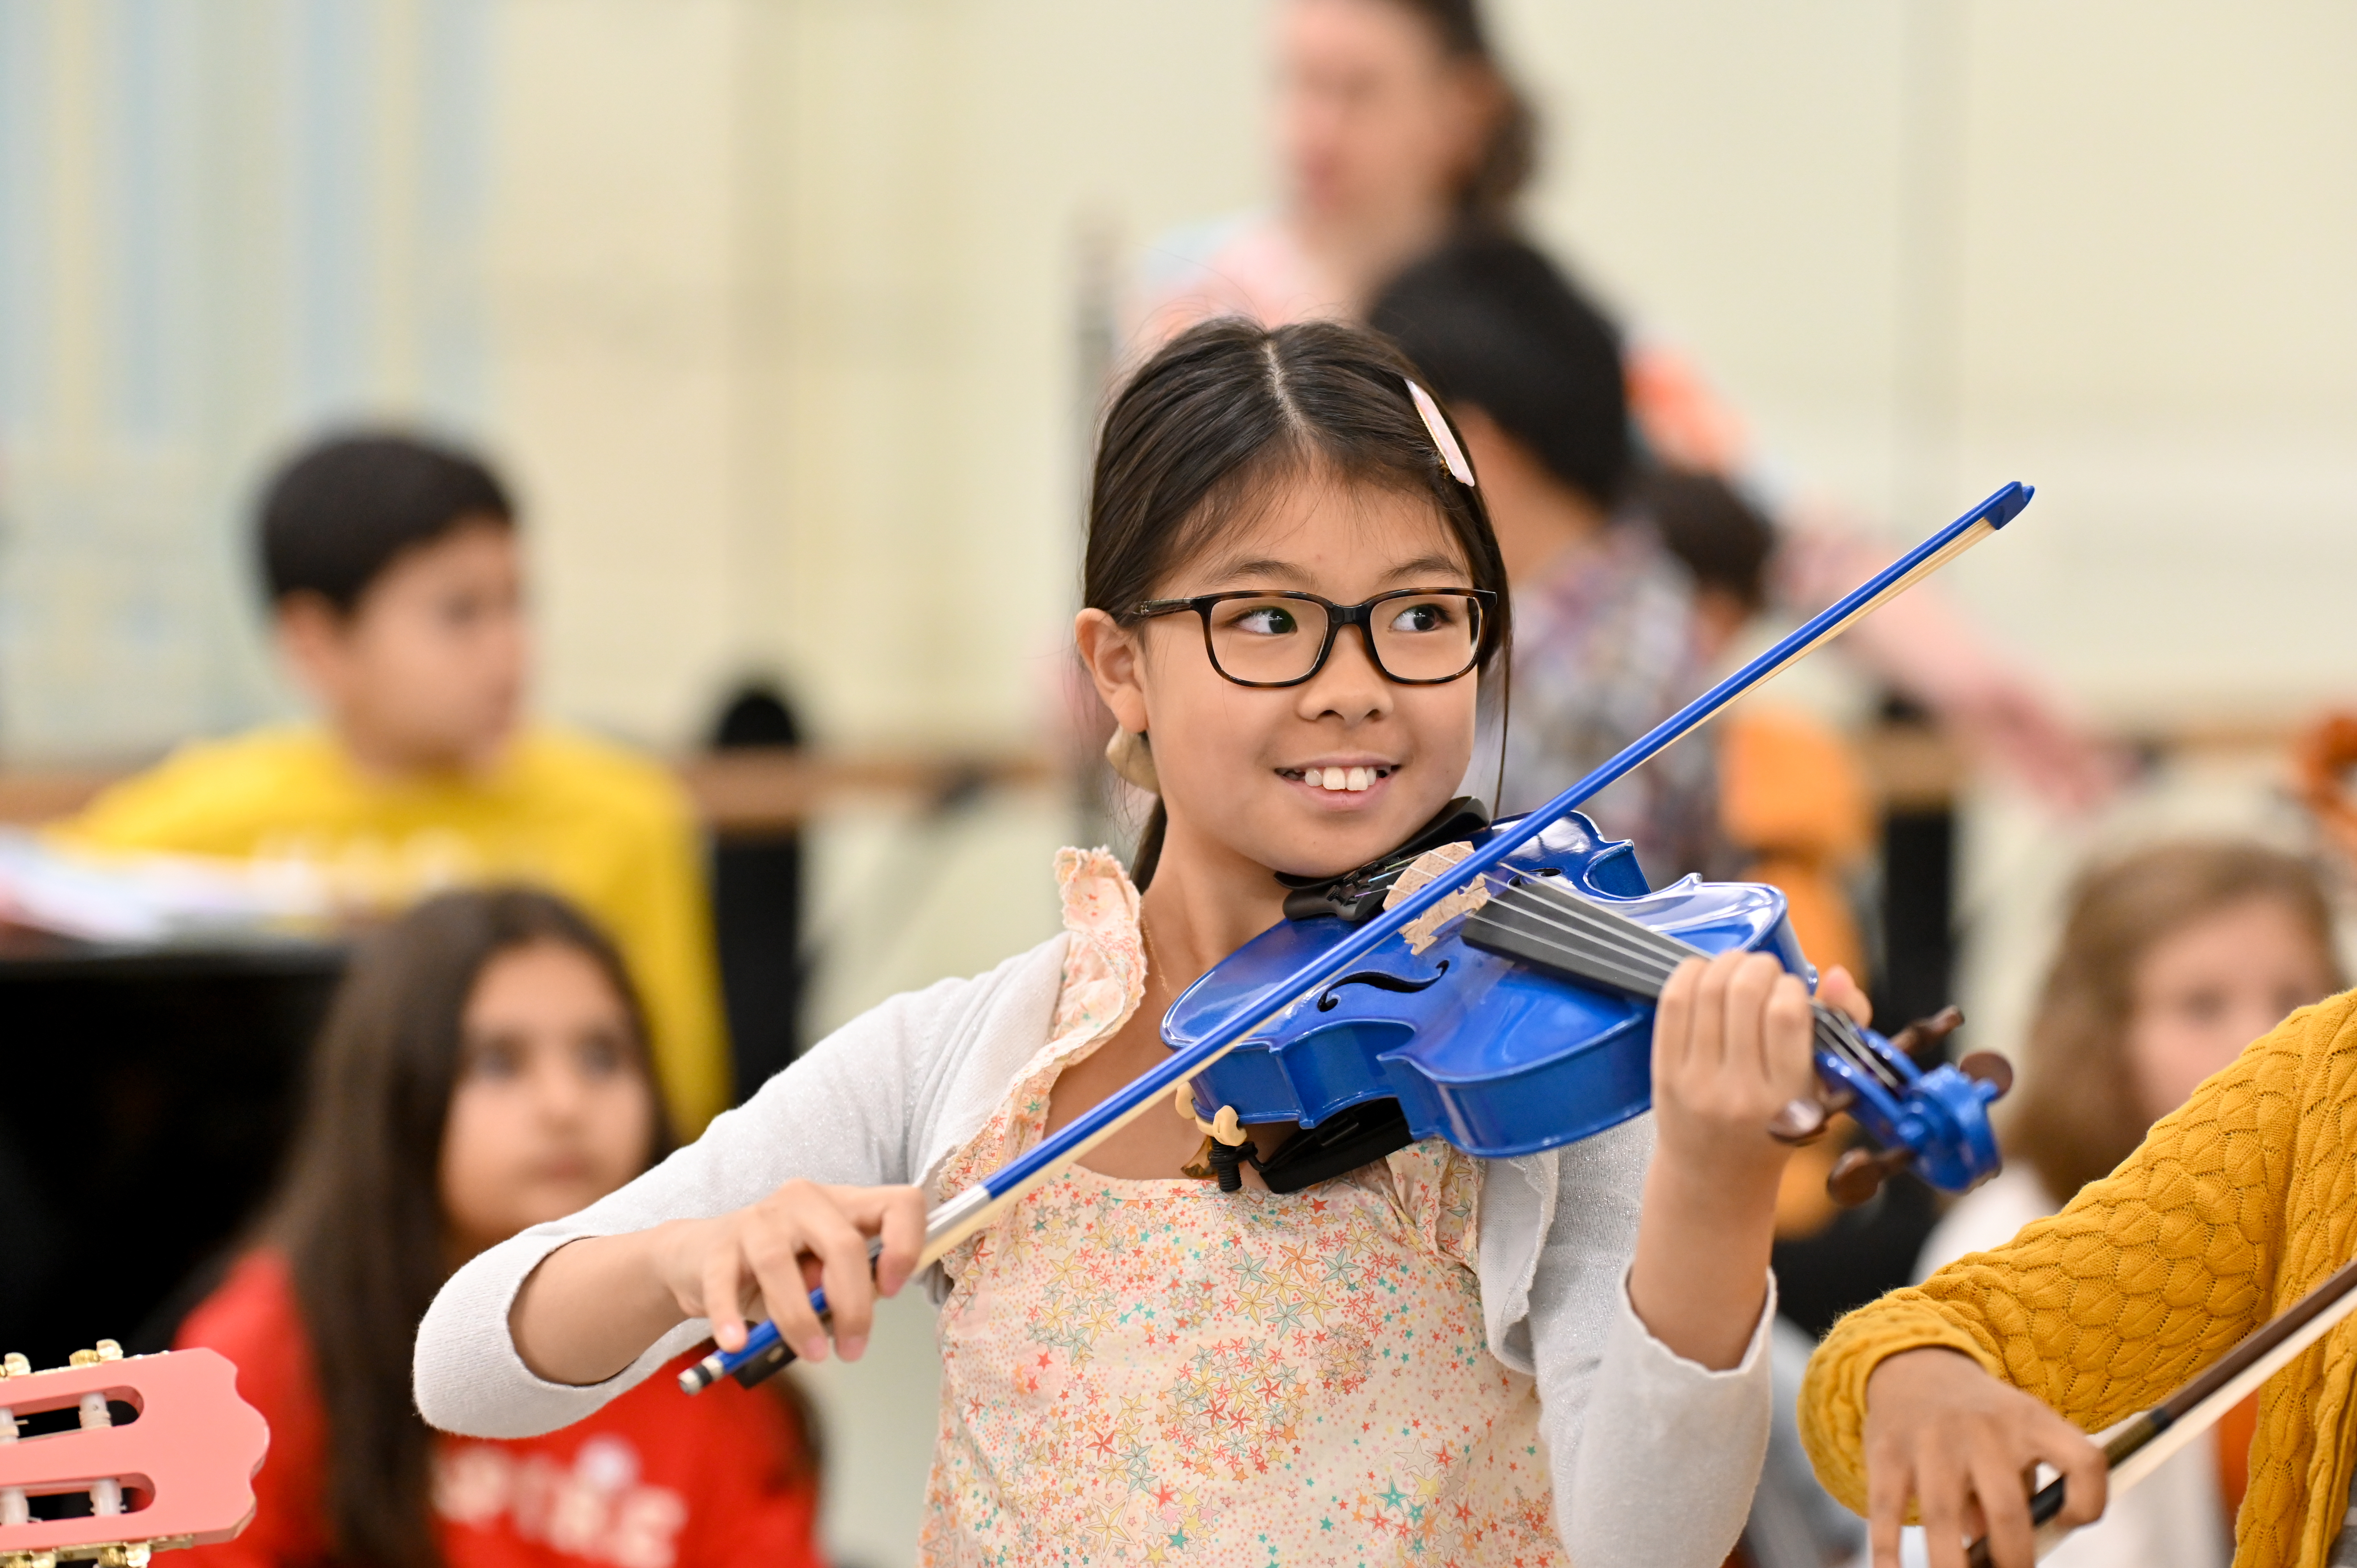 A little girl smiling and playing a bright blue violin with other children in the background